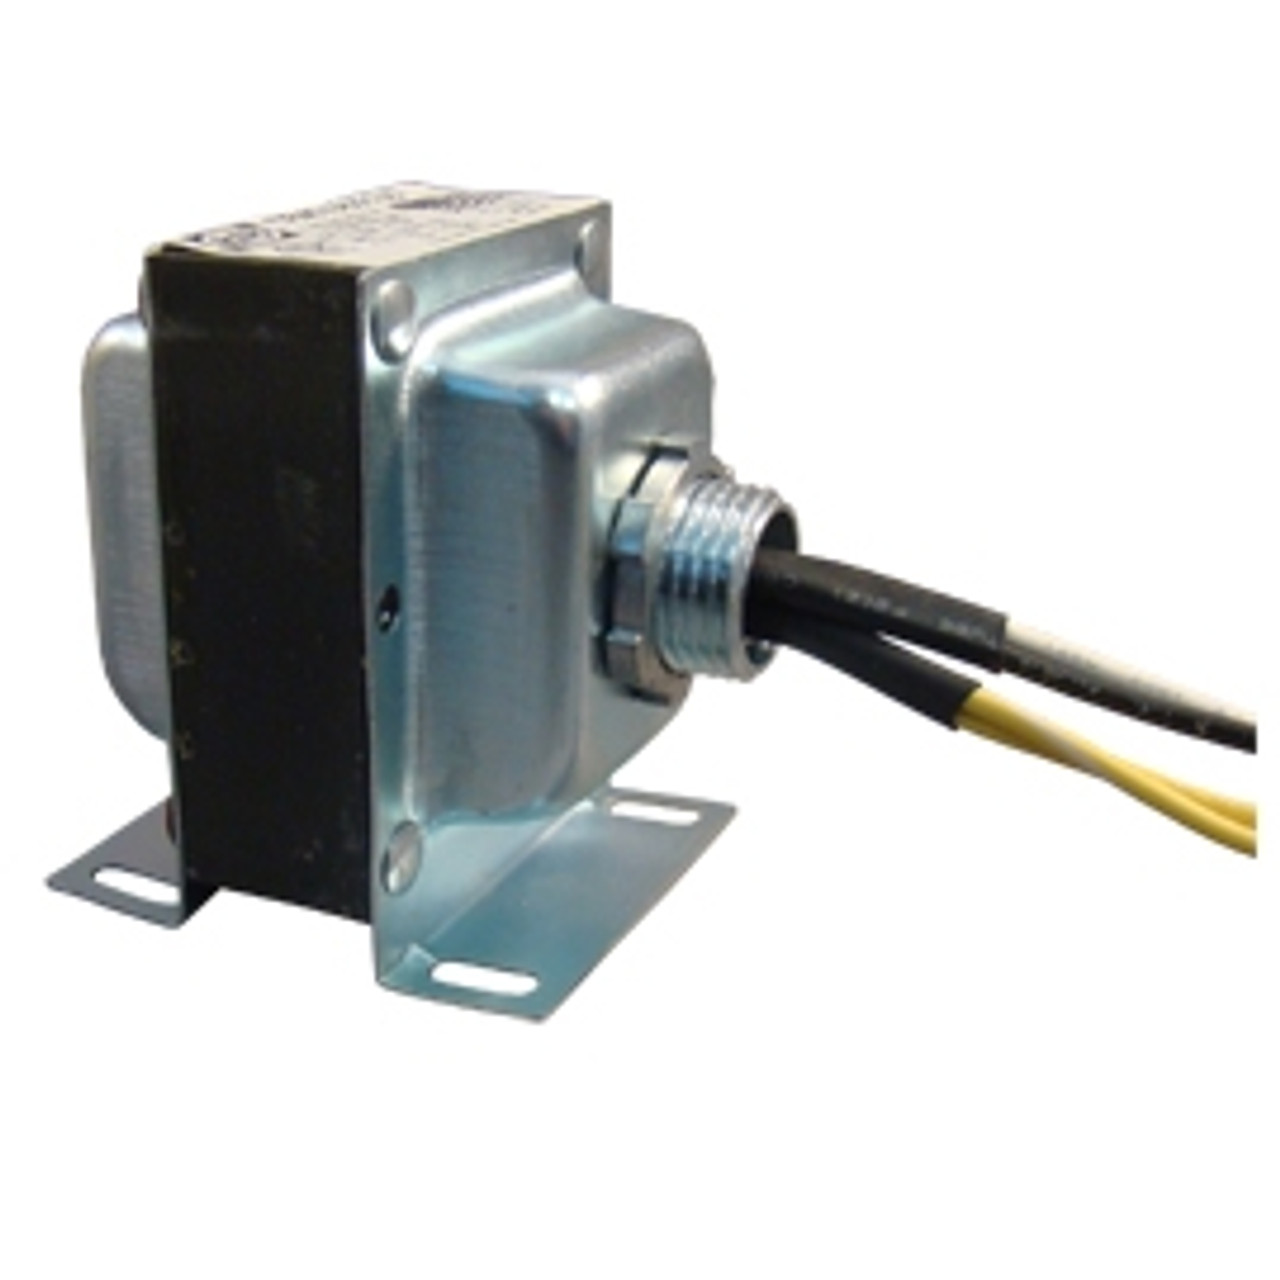 FUNCTIONAL DEVICES FUNTR40VA001US Transformer US made 40VA, 120-24V, 1 hub, Class 2 UL Listed US/Can,Inherent Lim